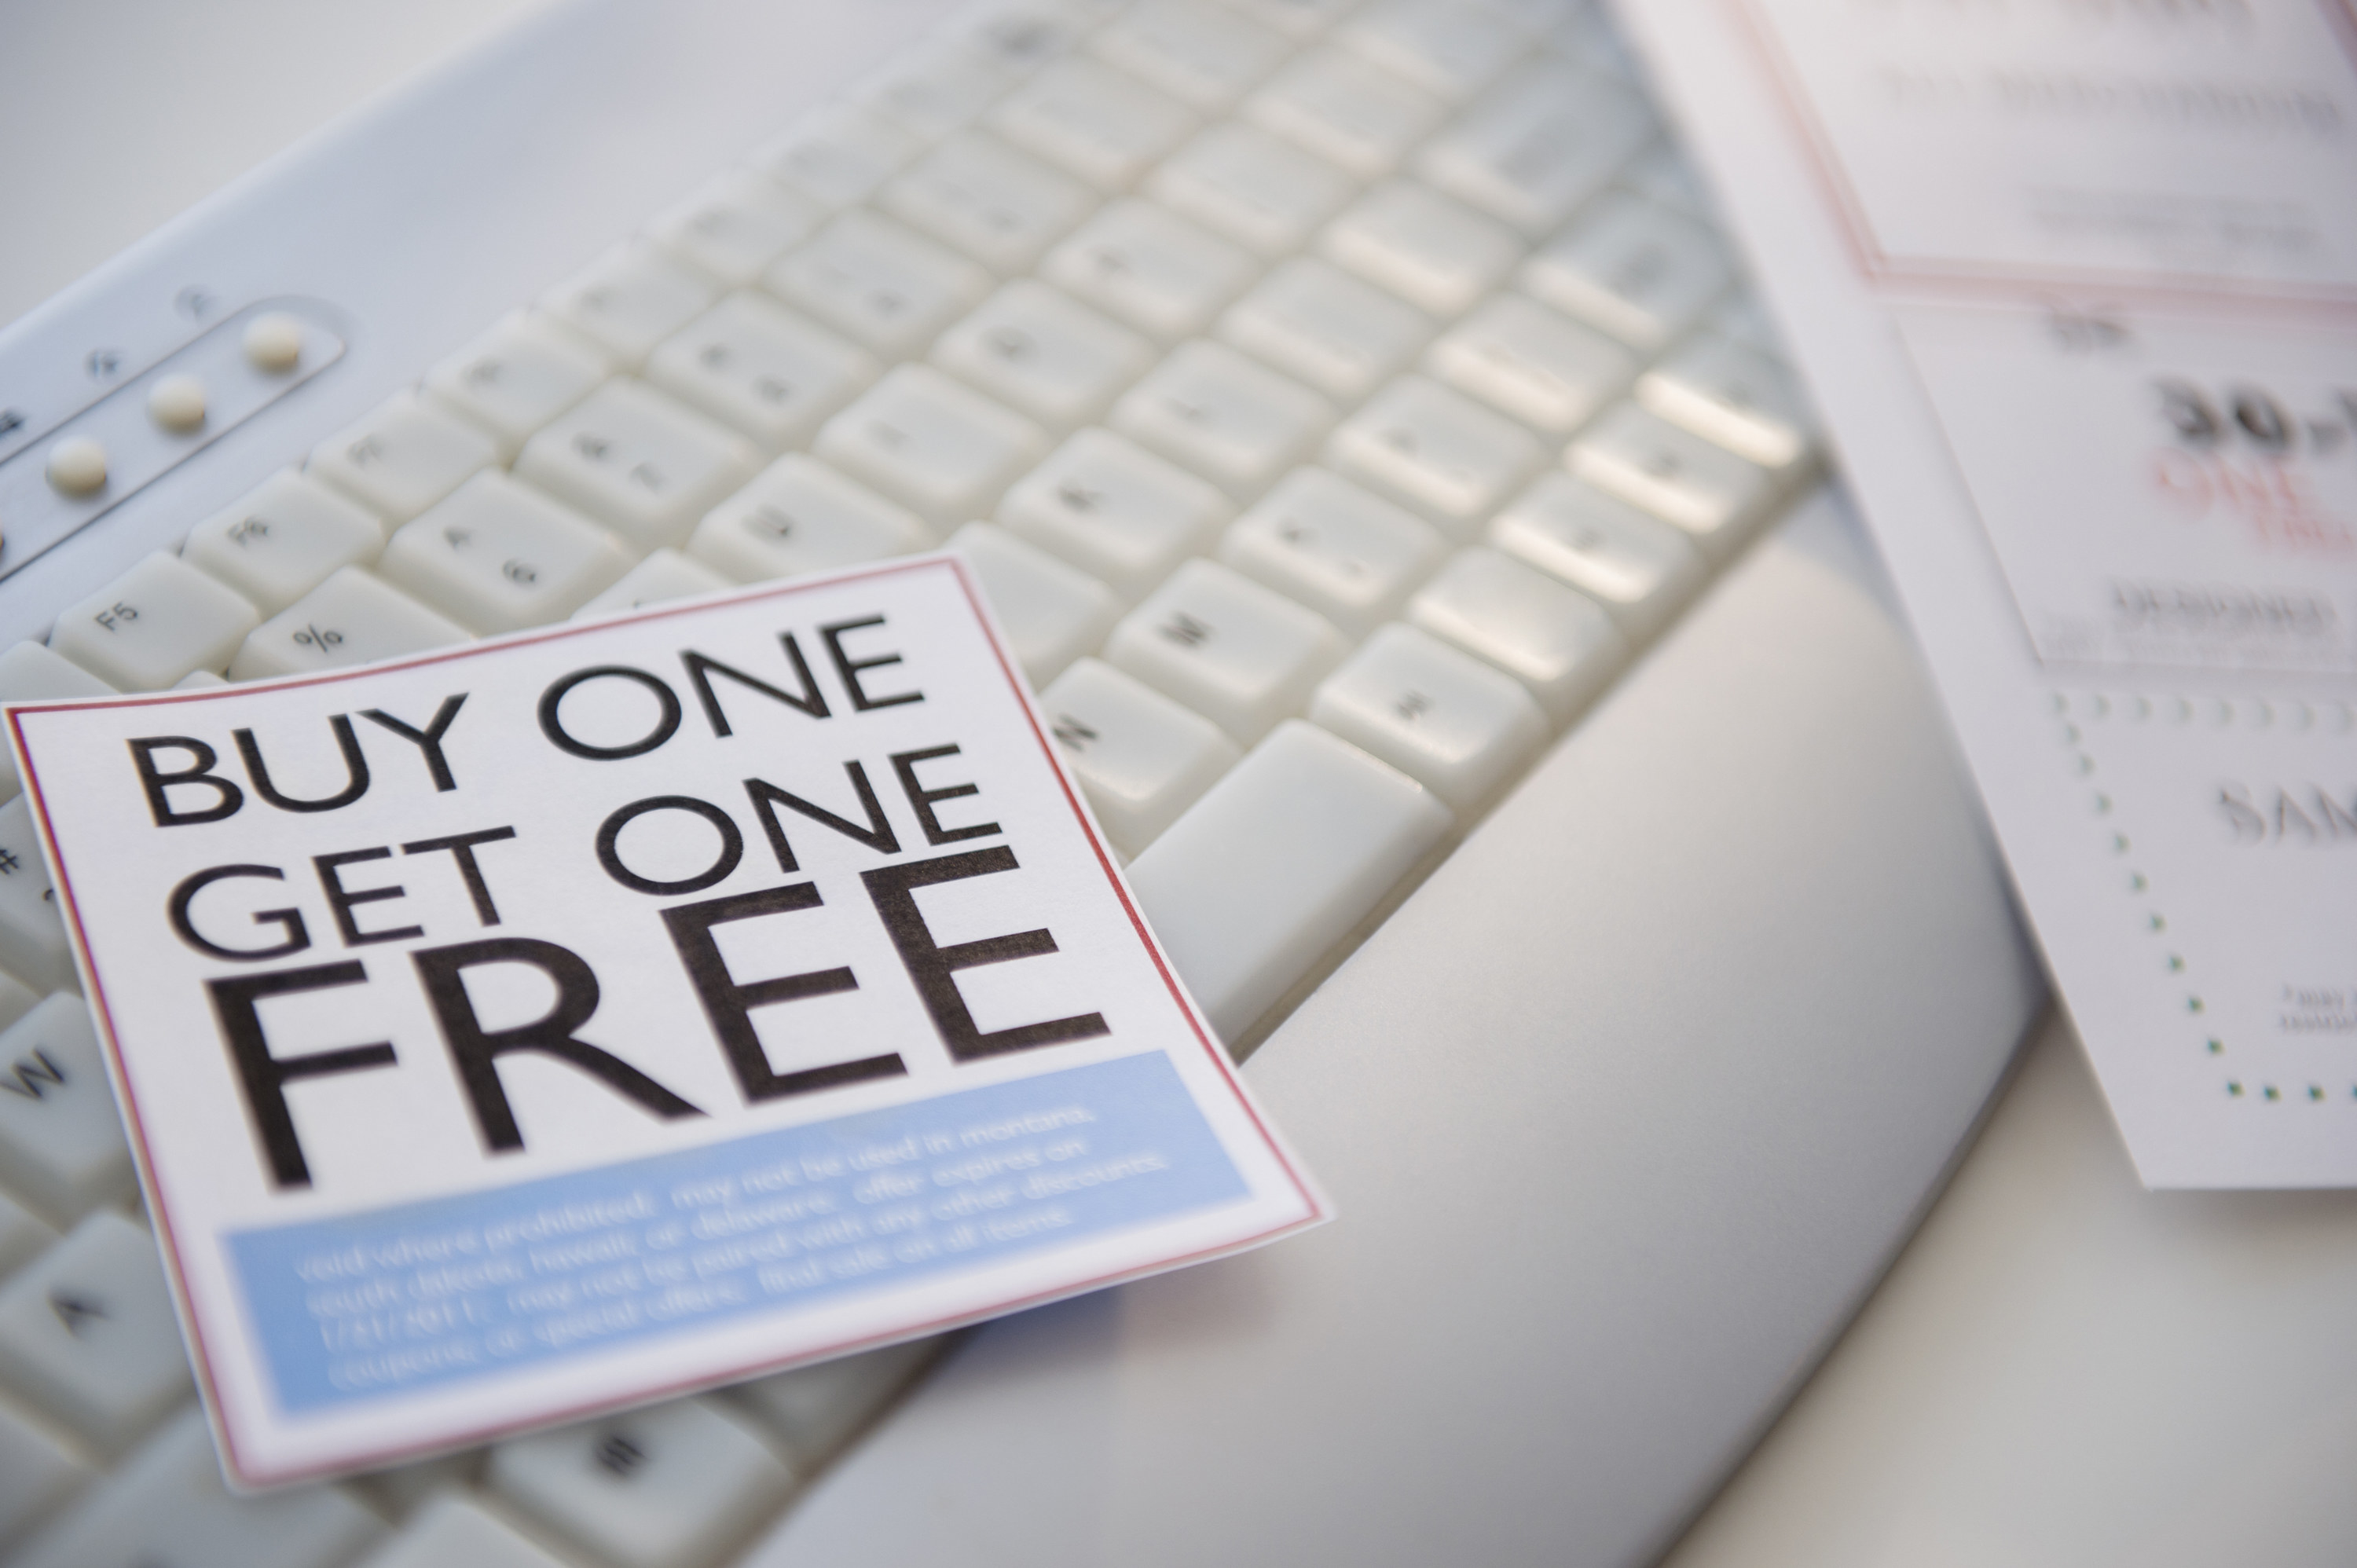 &quot;Buy one get one free&quot; coupon on a computer keyboard